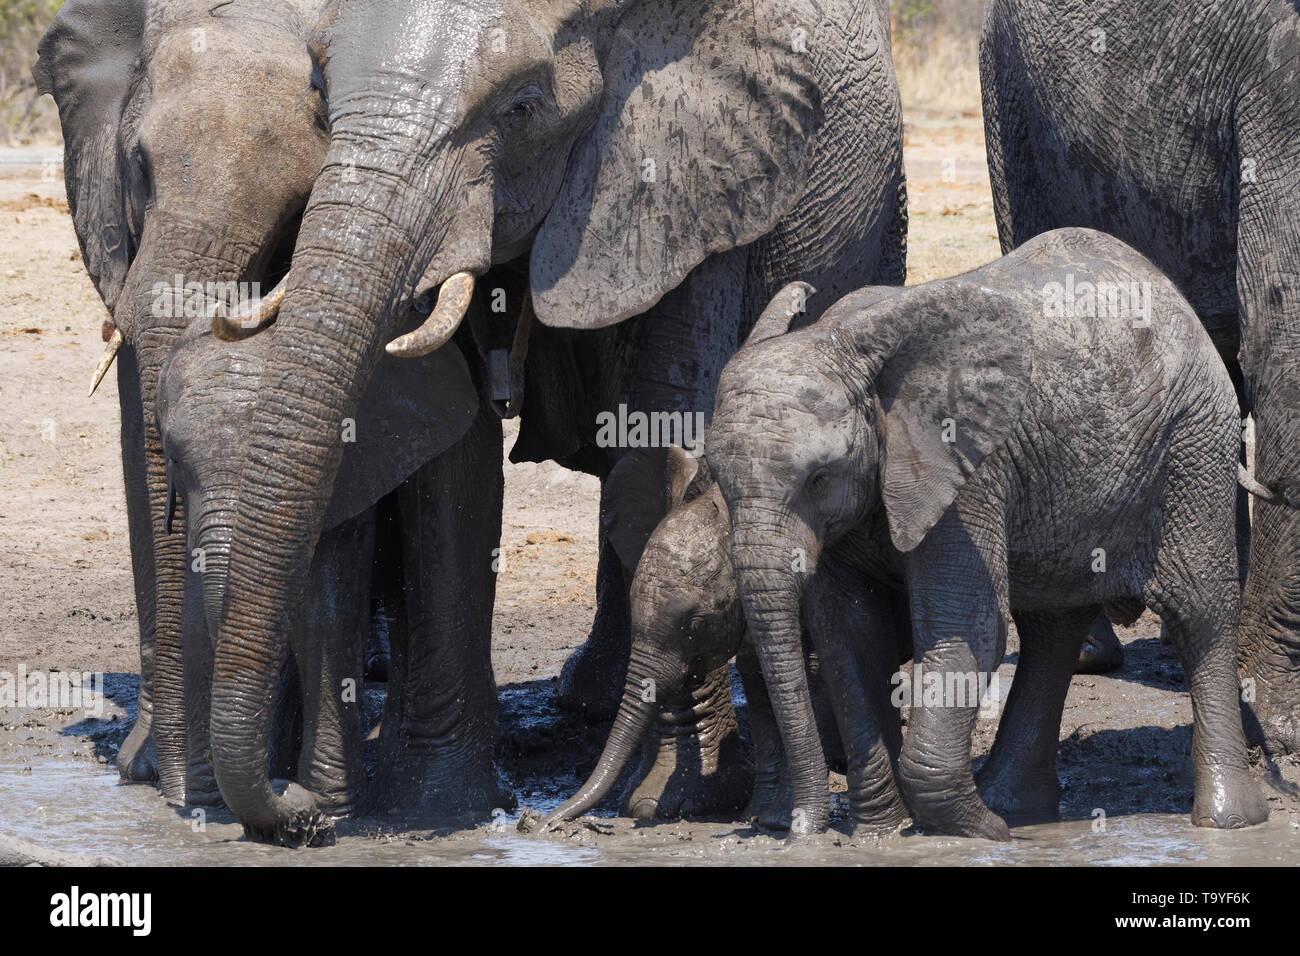 African bush elephants (Loxodonta africana), herd with calves and baby at a muddy waterhole, Kruger National Park, South Africa, Africa Stock Photo